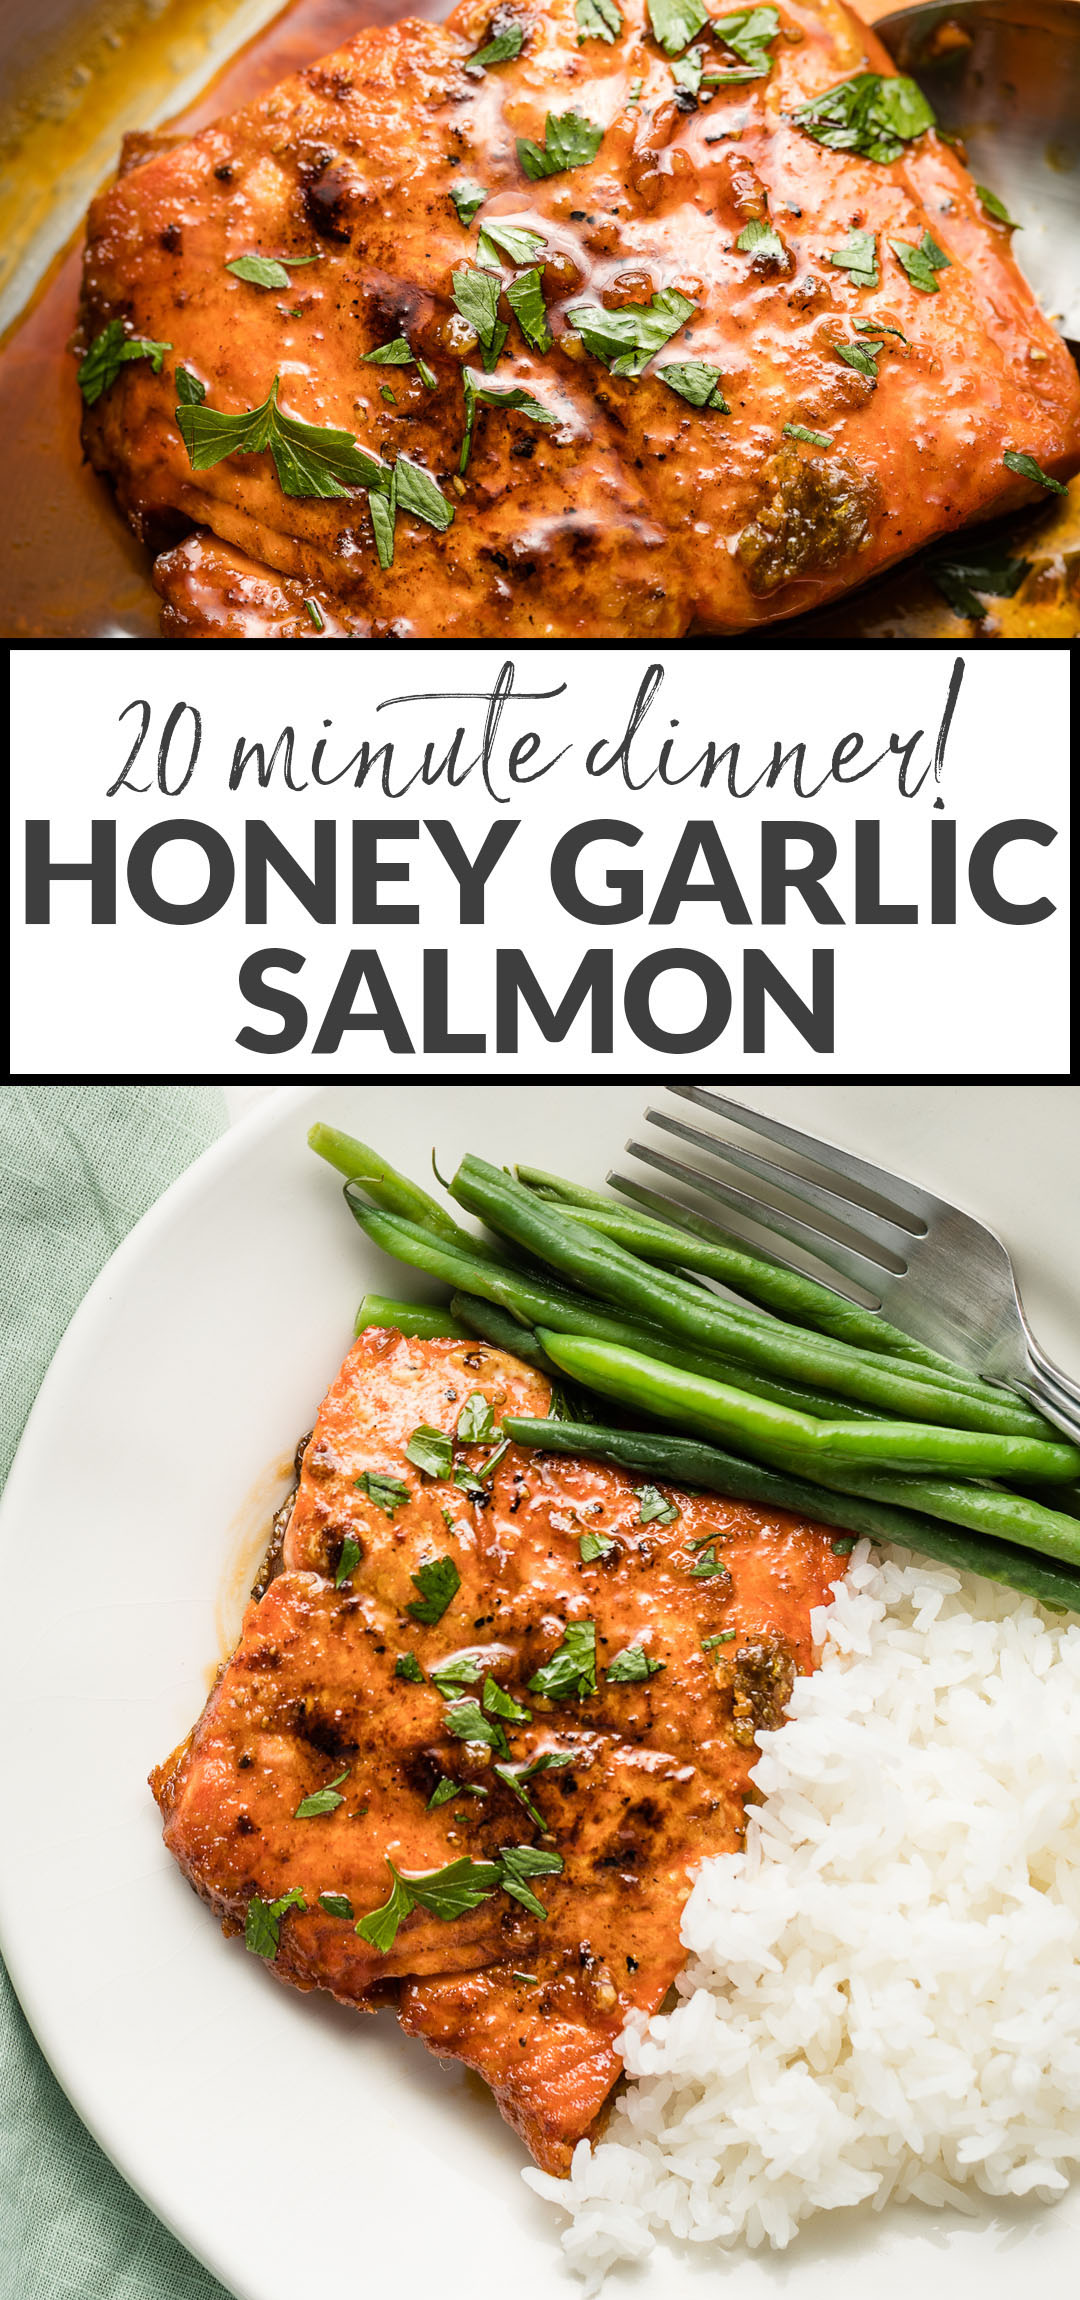 Tender salmon coated in an irresistible, 4-ingredient, sweet and savory sauce. This honey garlic salmon comes together in just 20 minutes and will be your new favorite healthy ultra-fast meal.